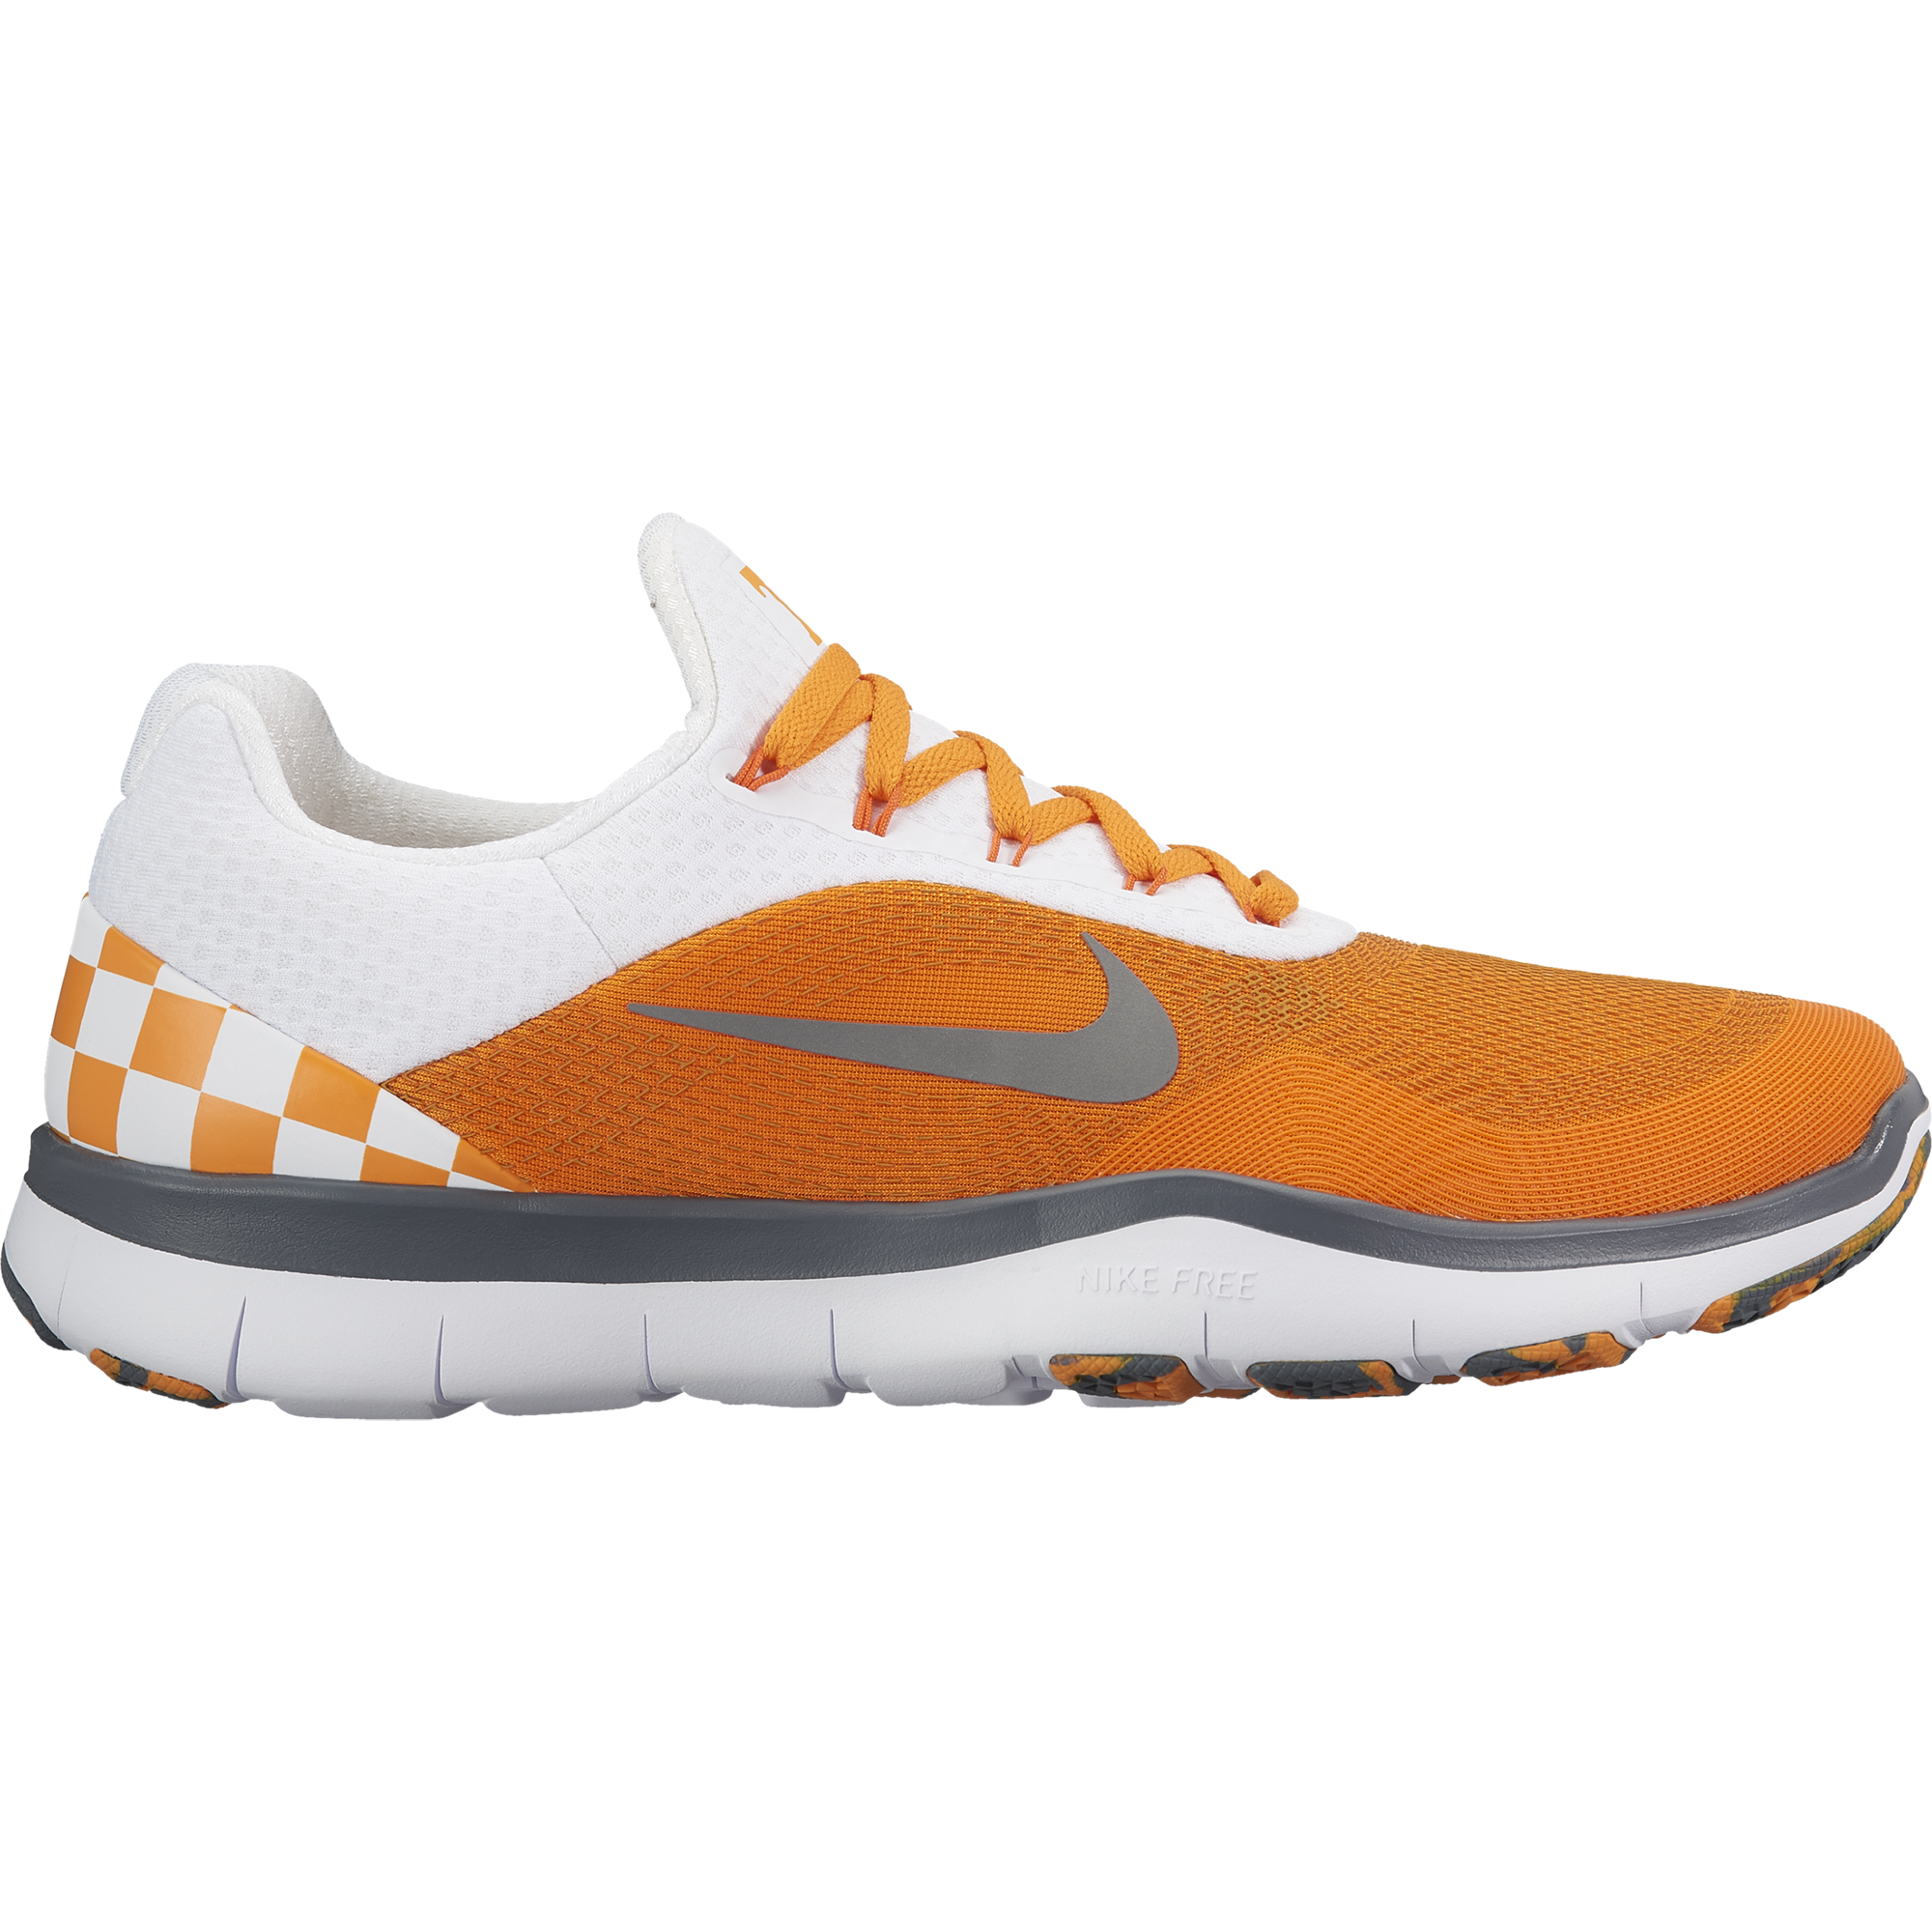 Tennessee Vols Nike Shoes 2017 | escapeauthority.com